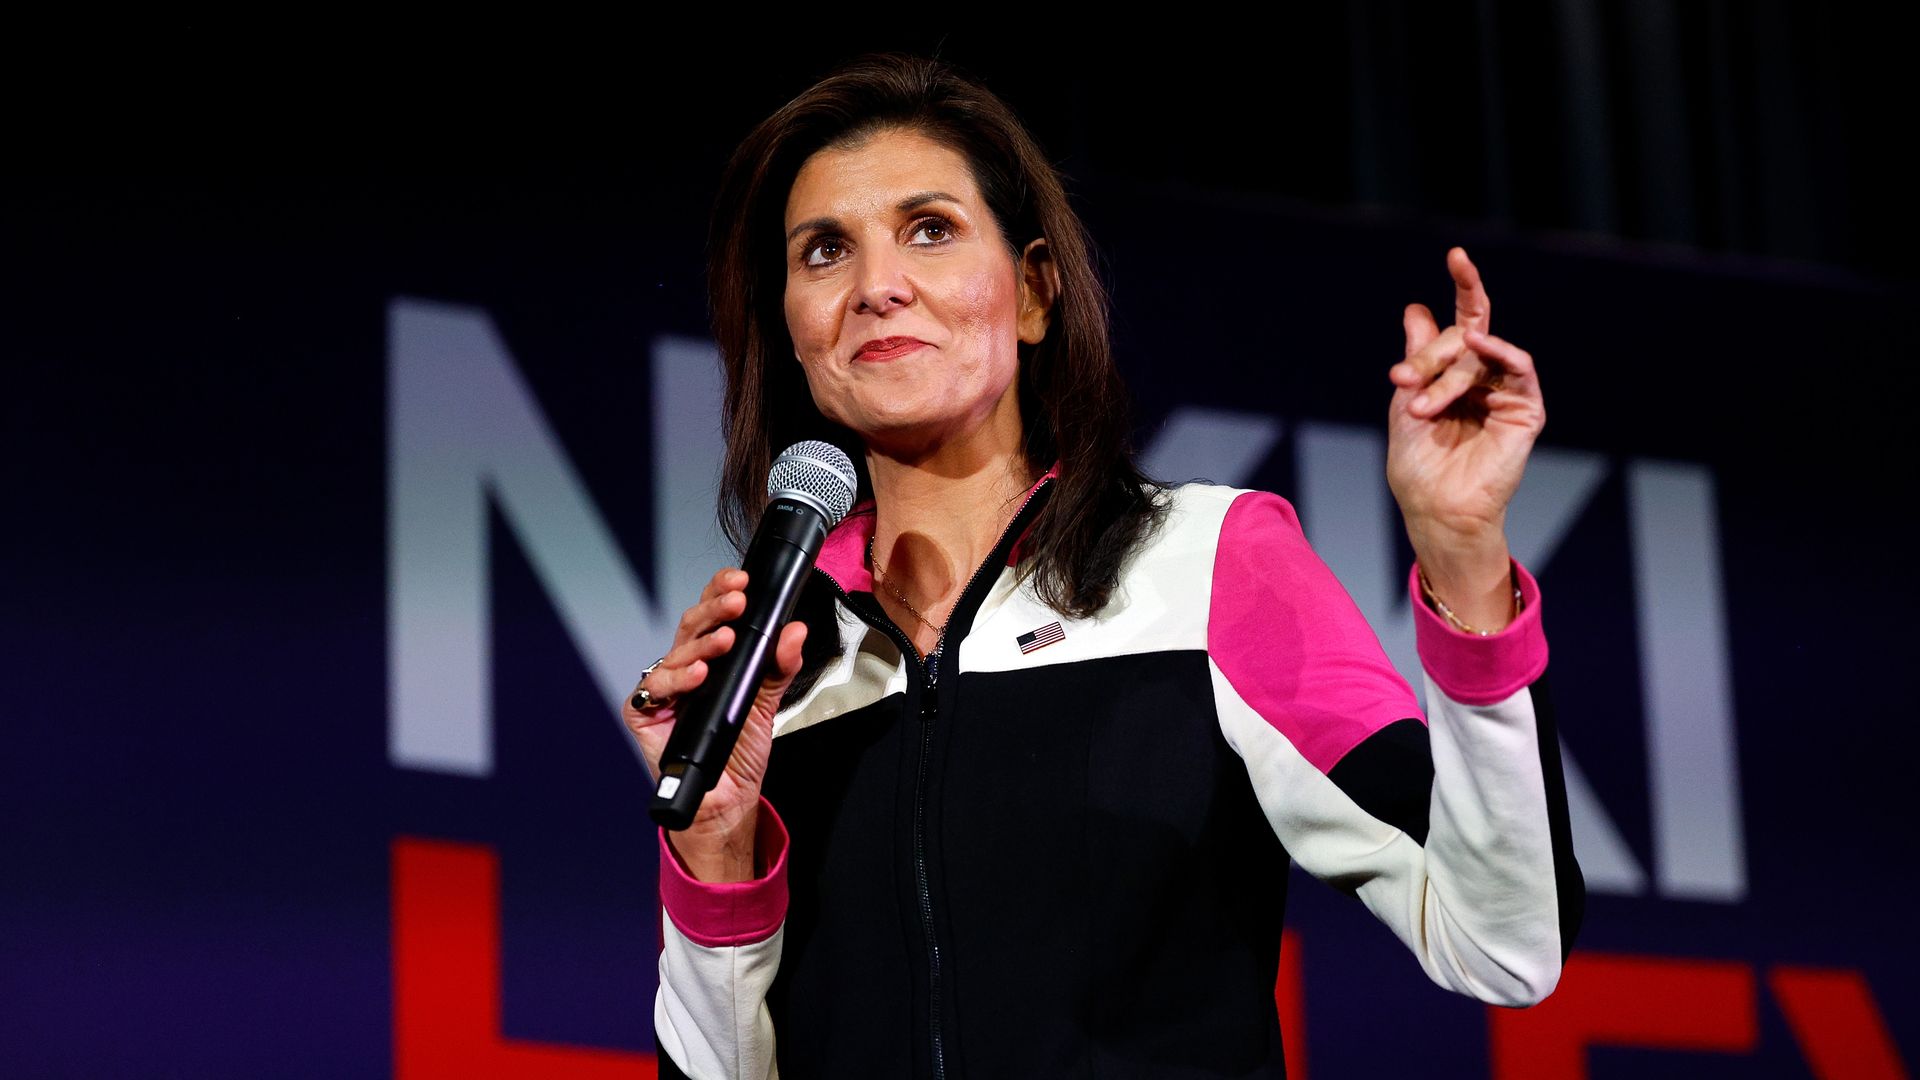 BLOOMINGTON, MINNESOTA - FEBRUARY 26: Republican presidential candidate, former U.N. Ambassador Nikki Haley speaks during a campaign event at the DoubleTree by Hilton Hotel on February 26, 2024 in Bloomington, Minnesota. Minnesota holds its primary election on March 5